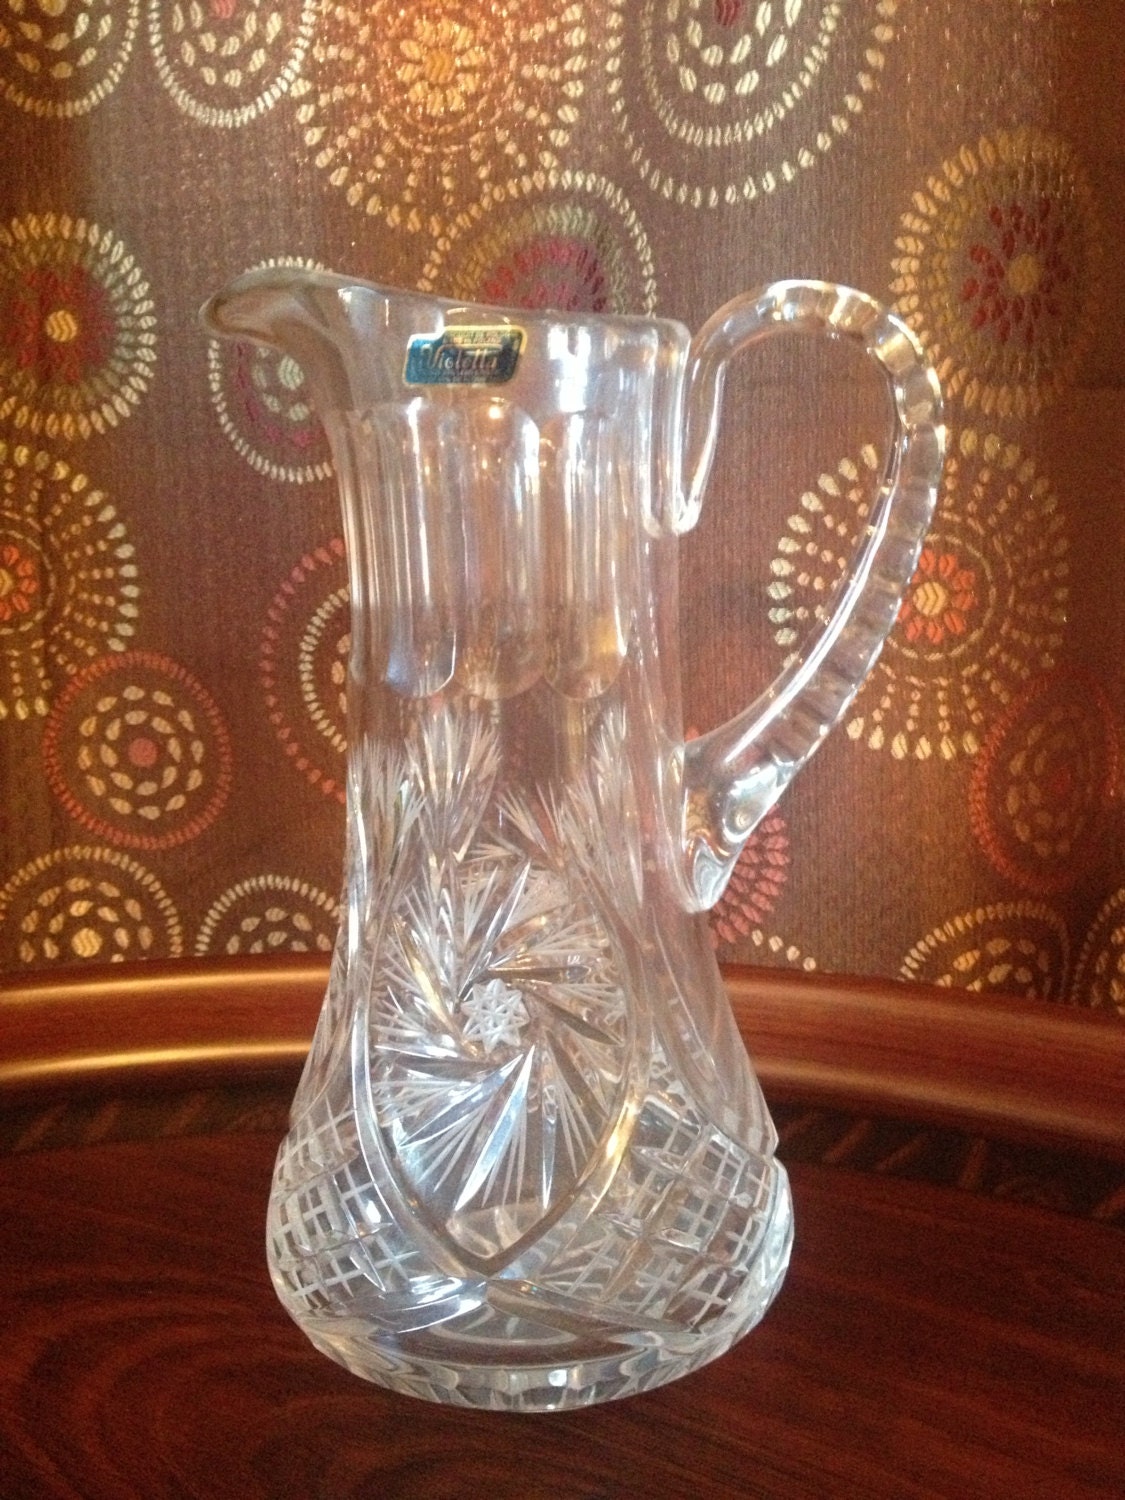 Items Similar To Vintage Violetta 24 Lead Crystal Pitcher Hand Cut Made In Poland On Etsy 0418